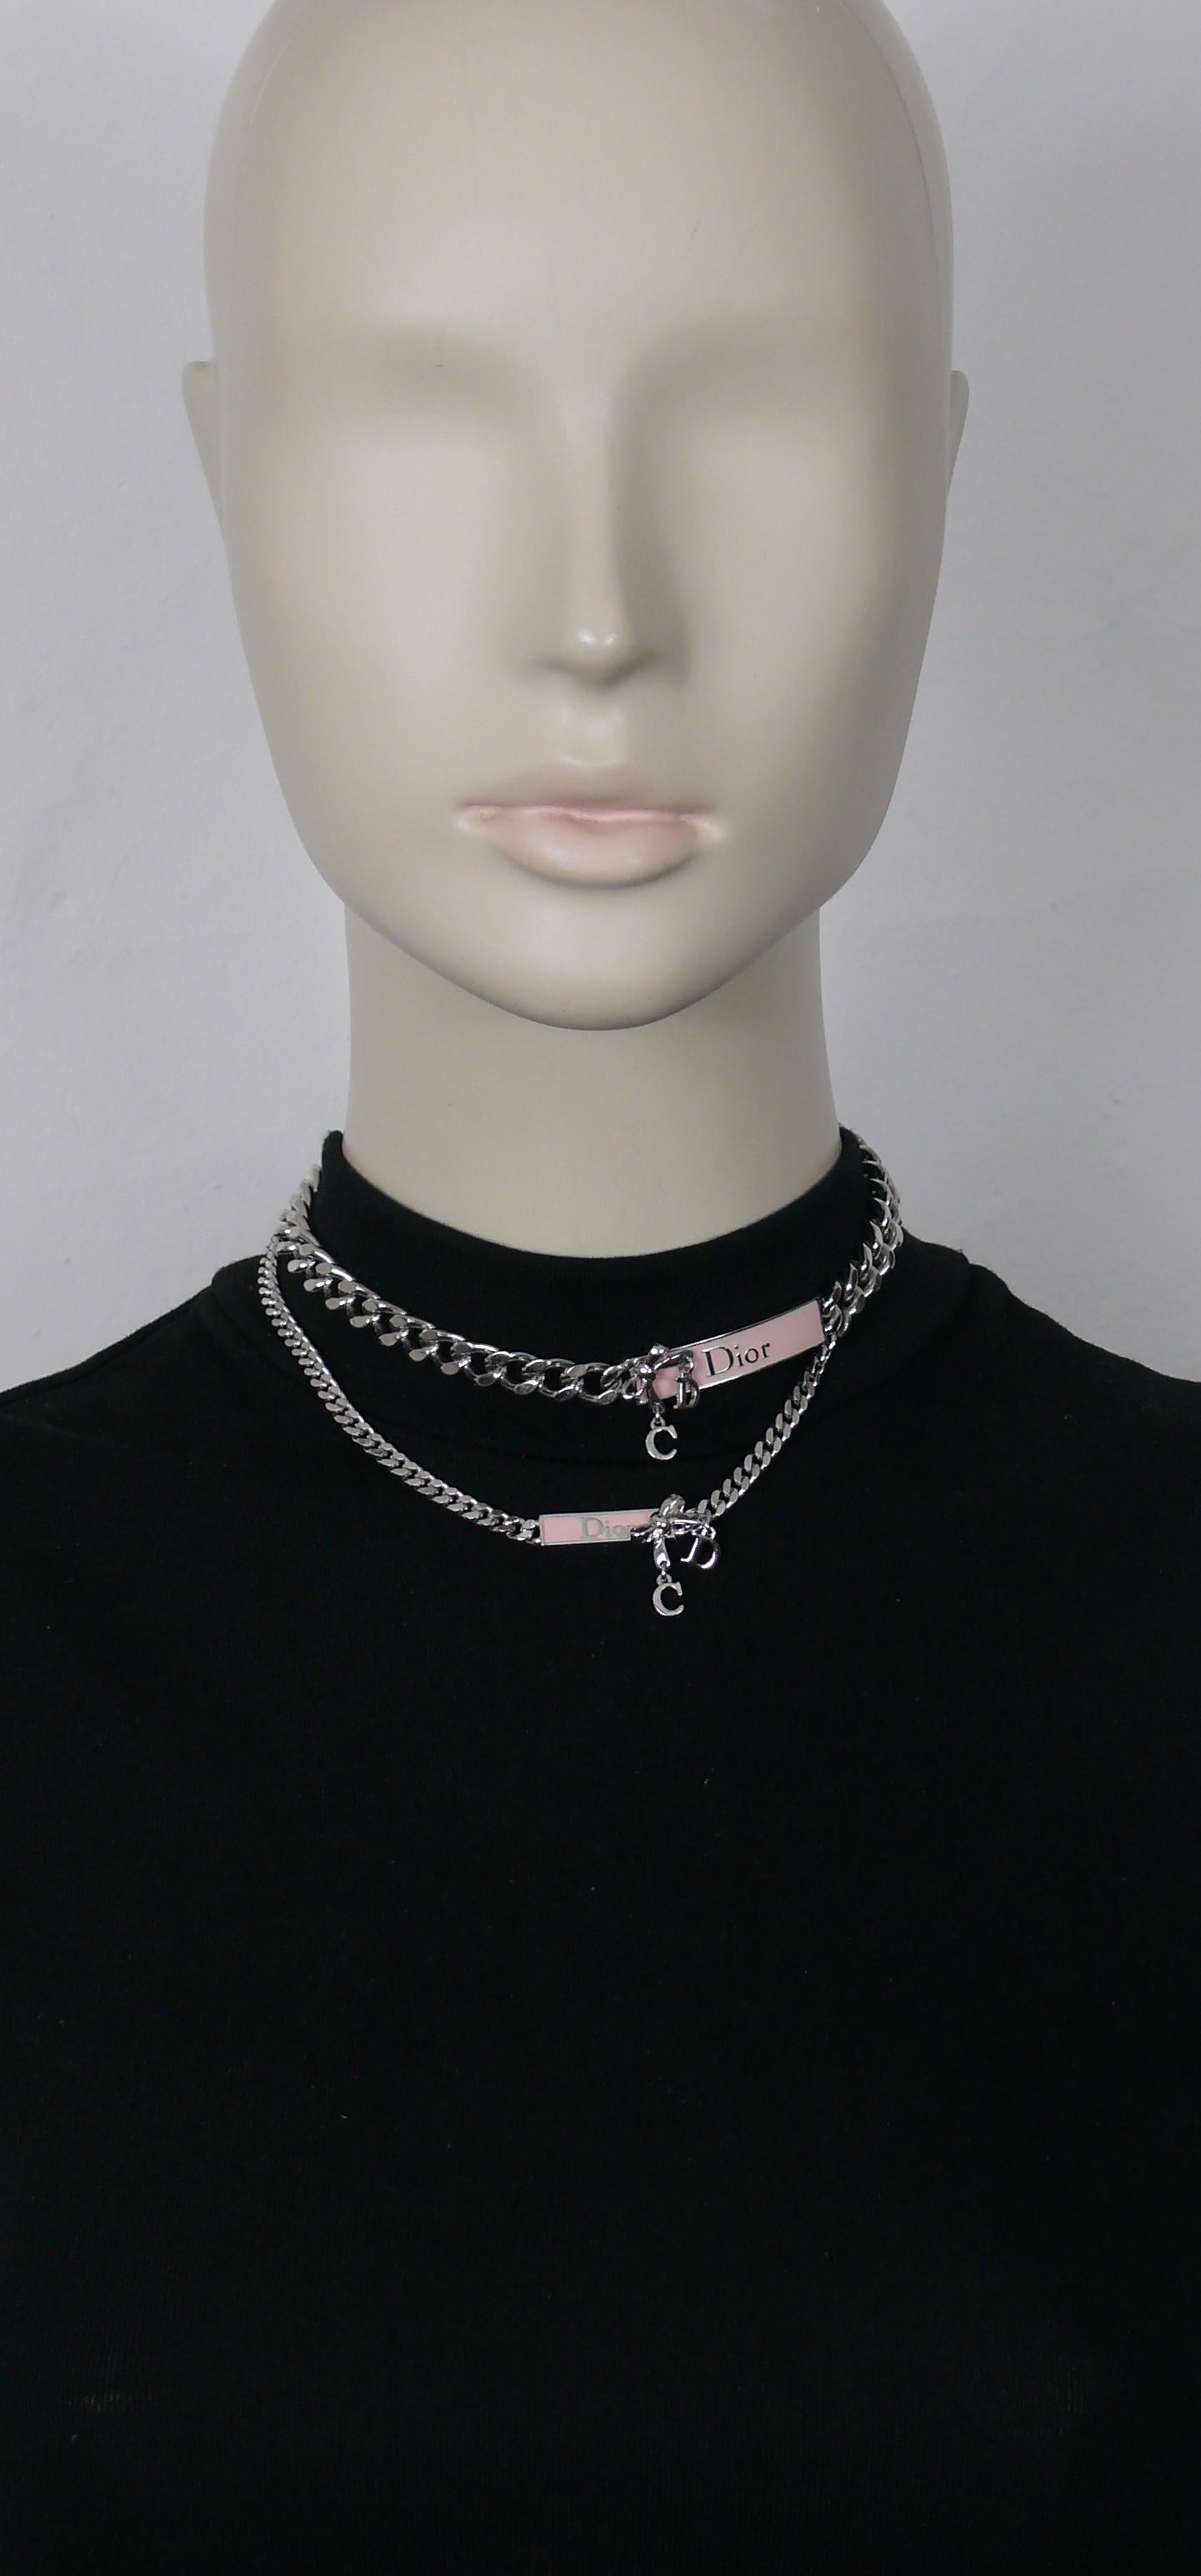 CHRISTIAN DIOR double chain necklace featuring two pink enamel tag withs D I O R, bow and dangling CD initials.

Silver tone metal hardware.

Hook clasp closure.
Adjustable length.

Embossed DIOR.

Indicative measurements : adjustable length from